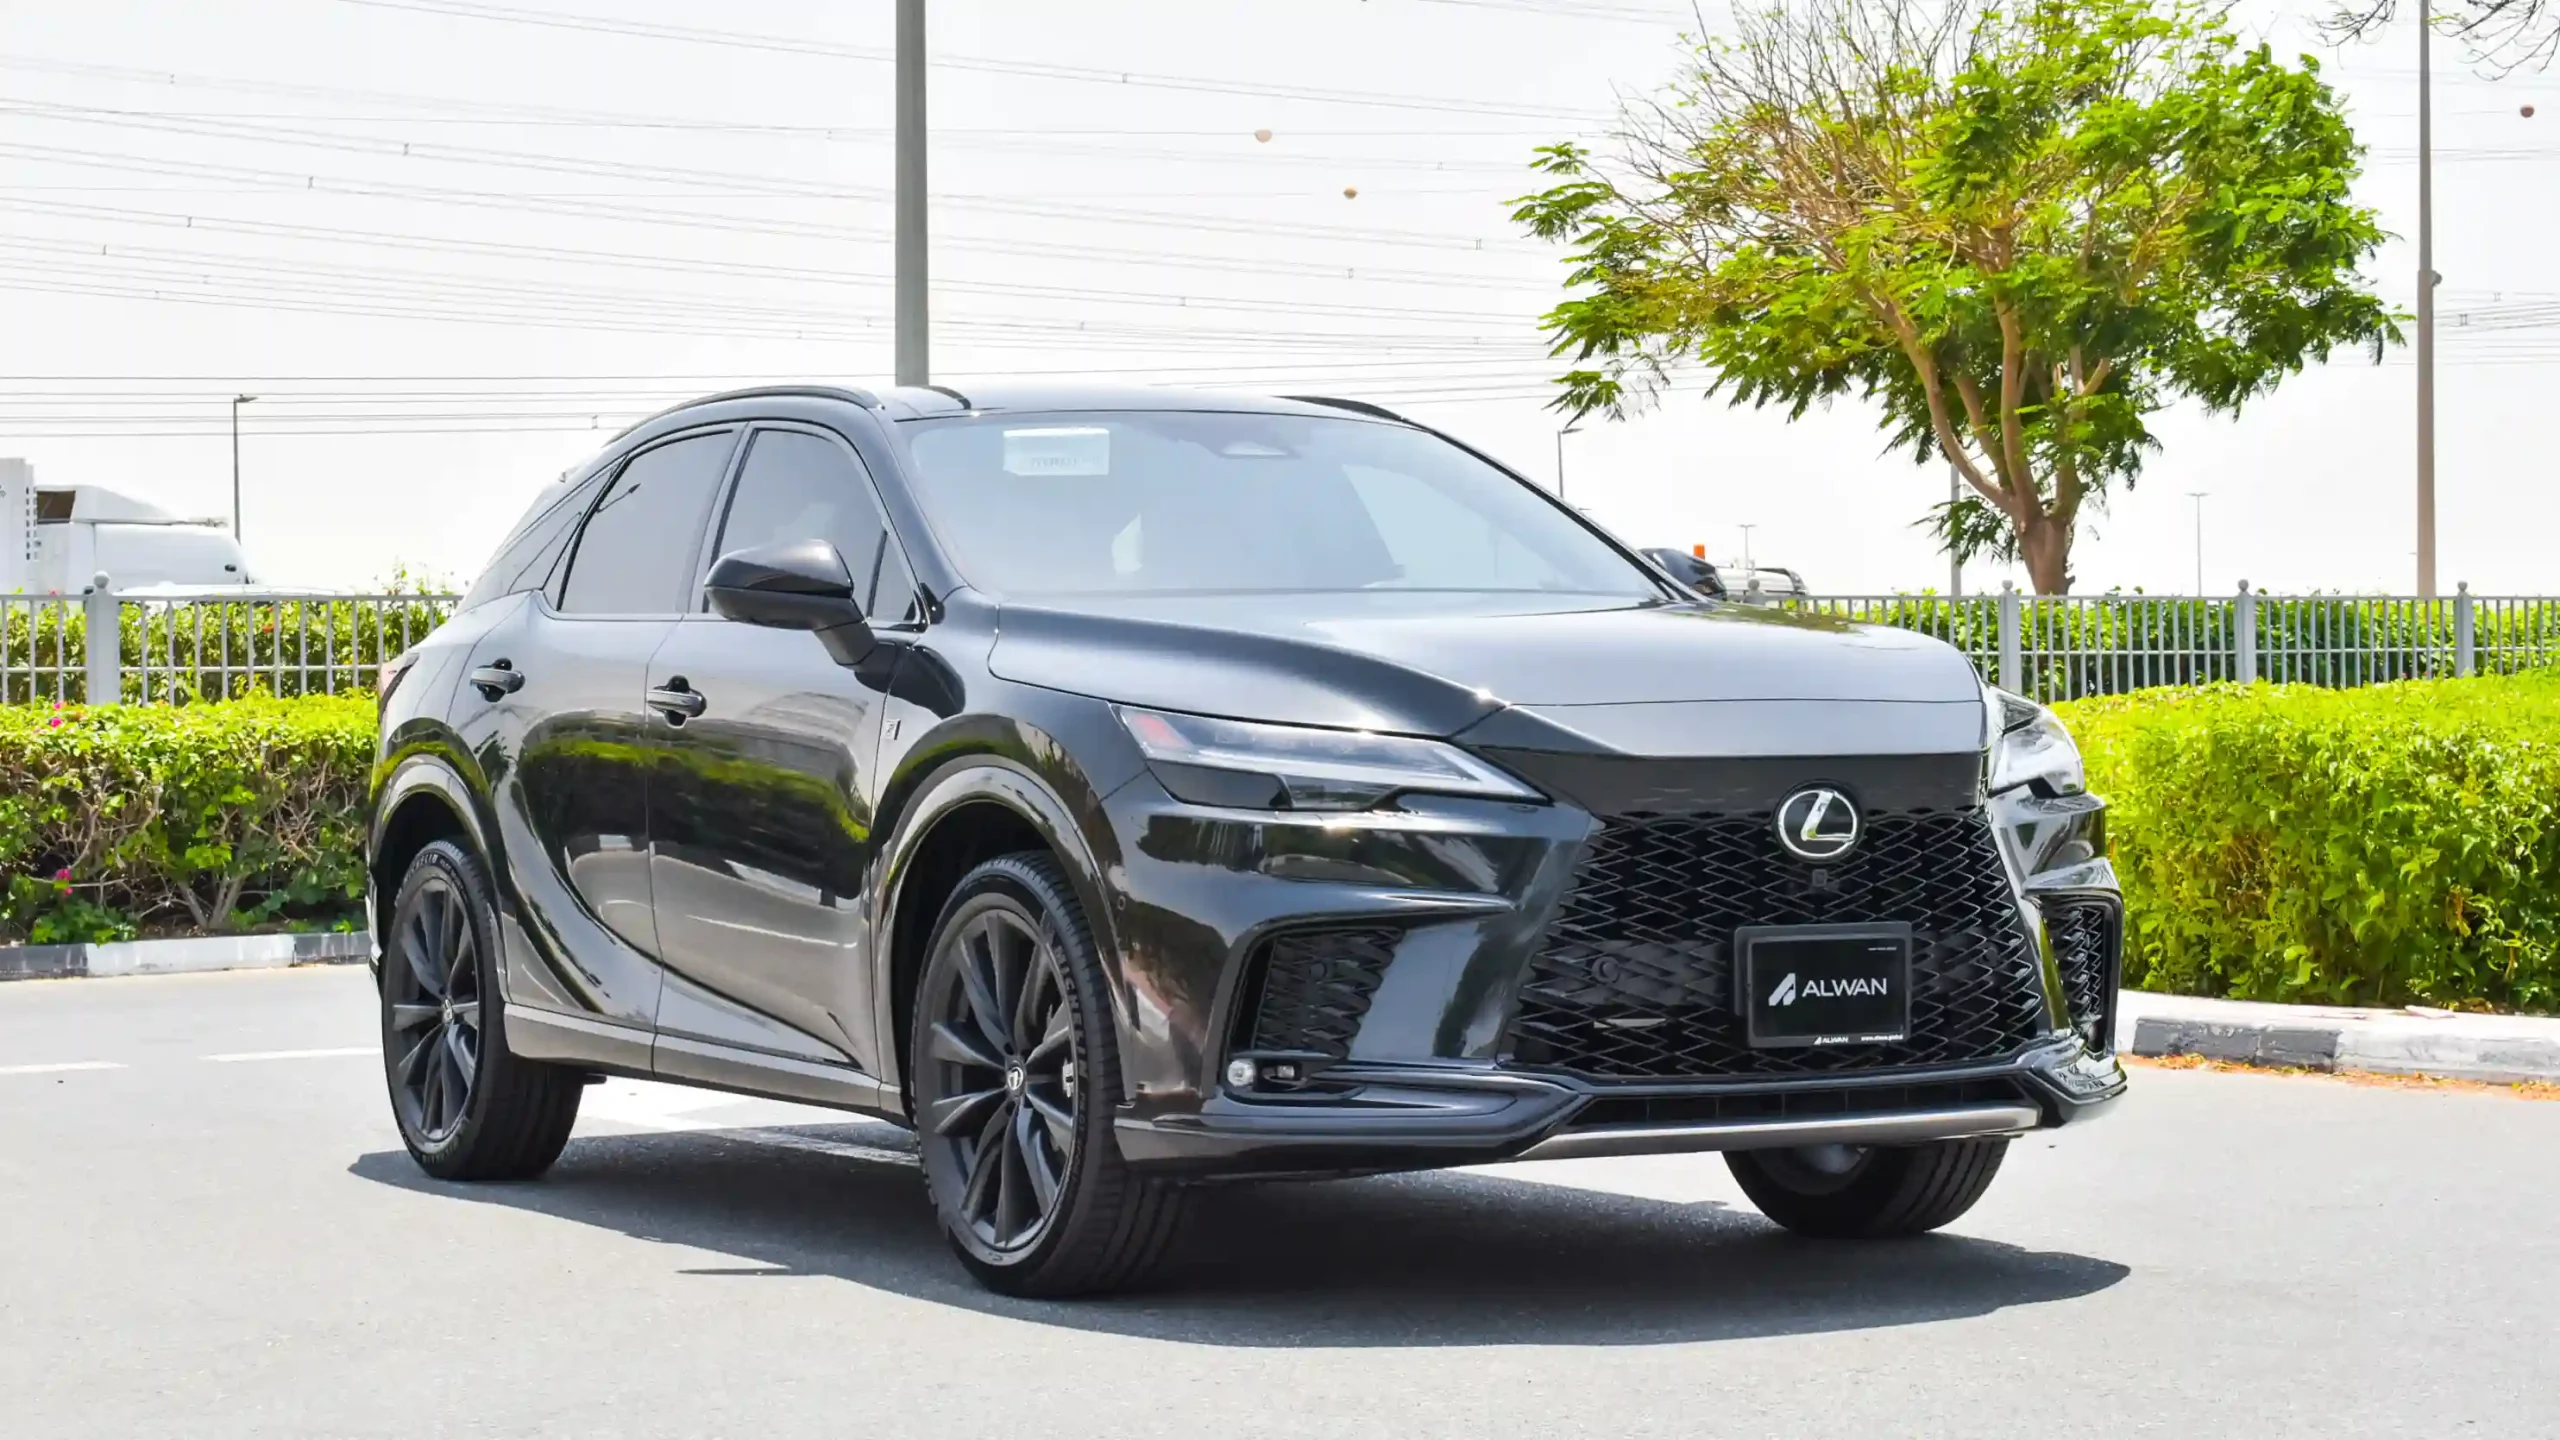 2023 Lexus RX First Drive Review: Bold colors, three hybrids, irksome tech